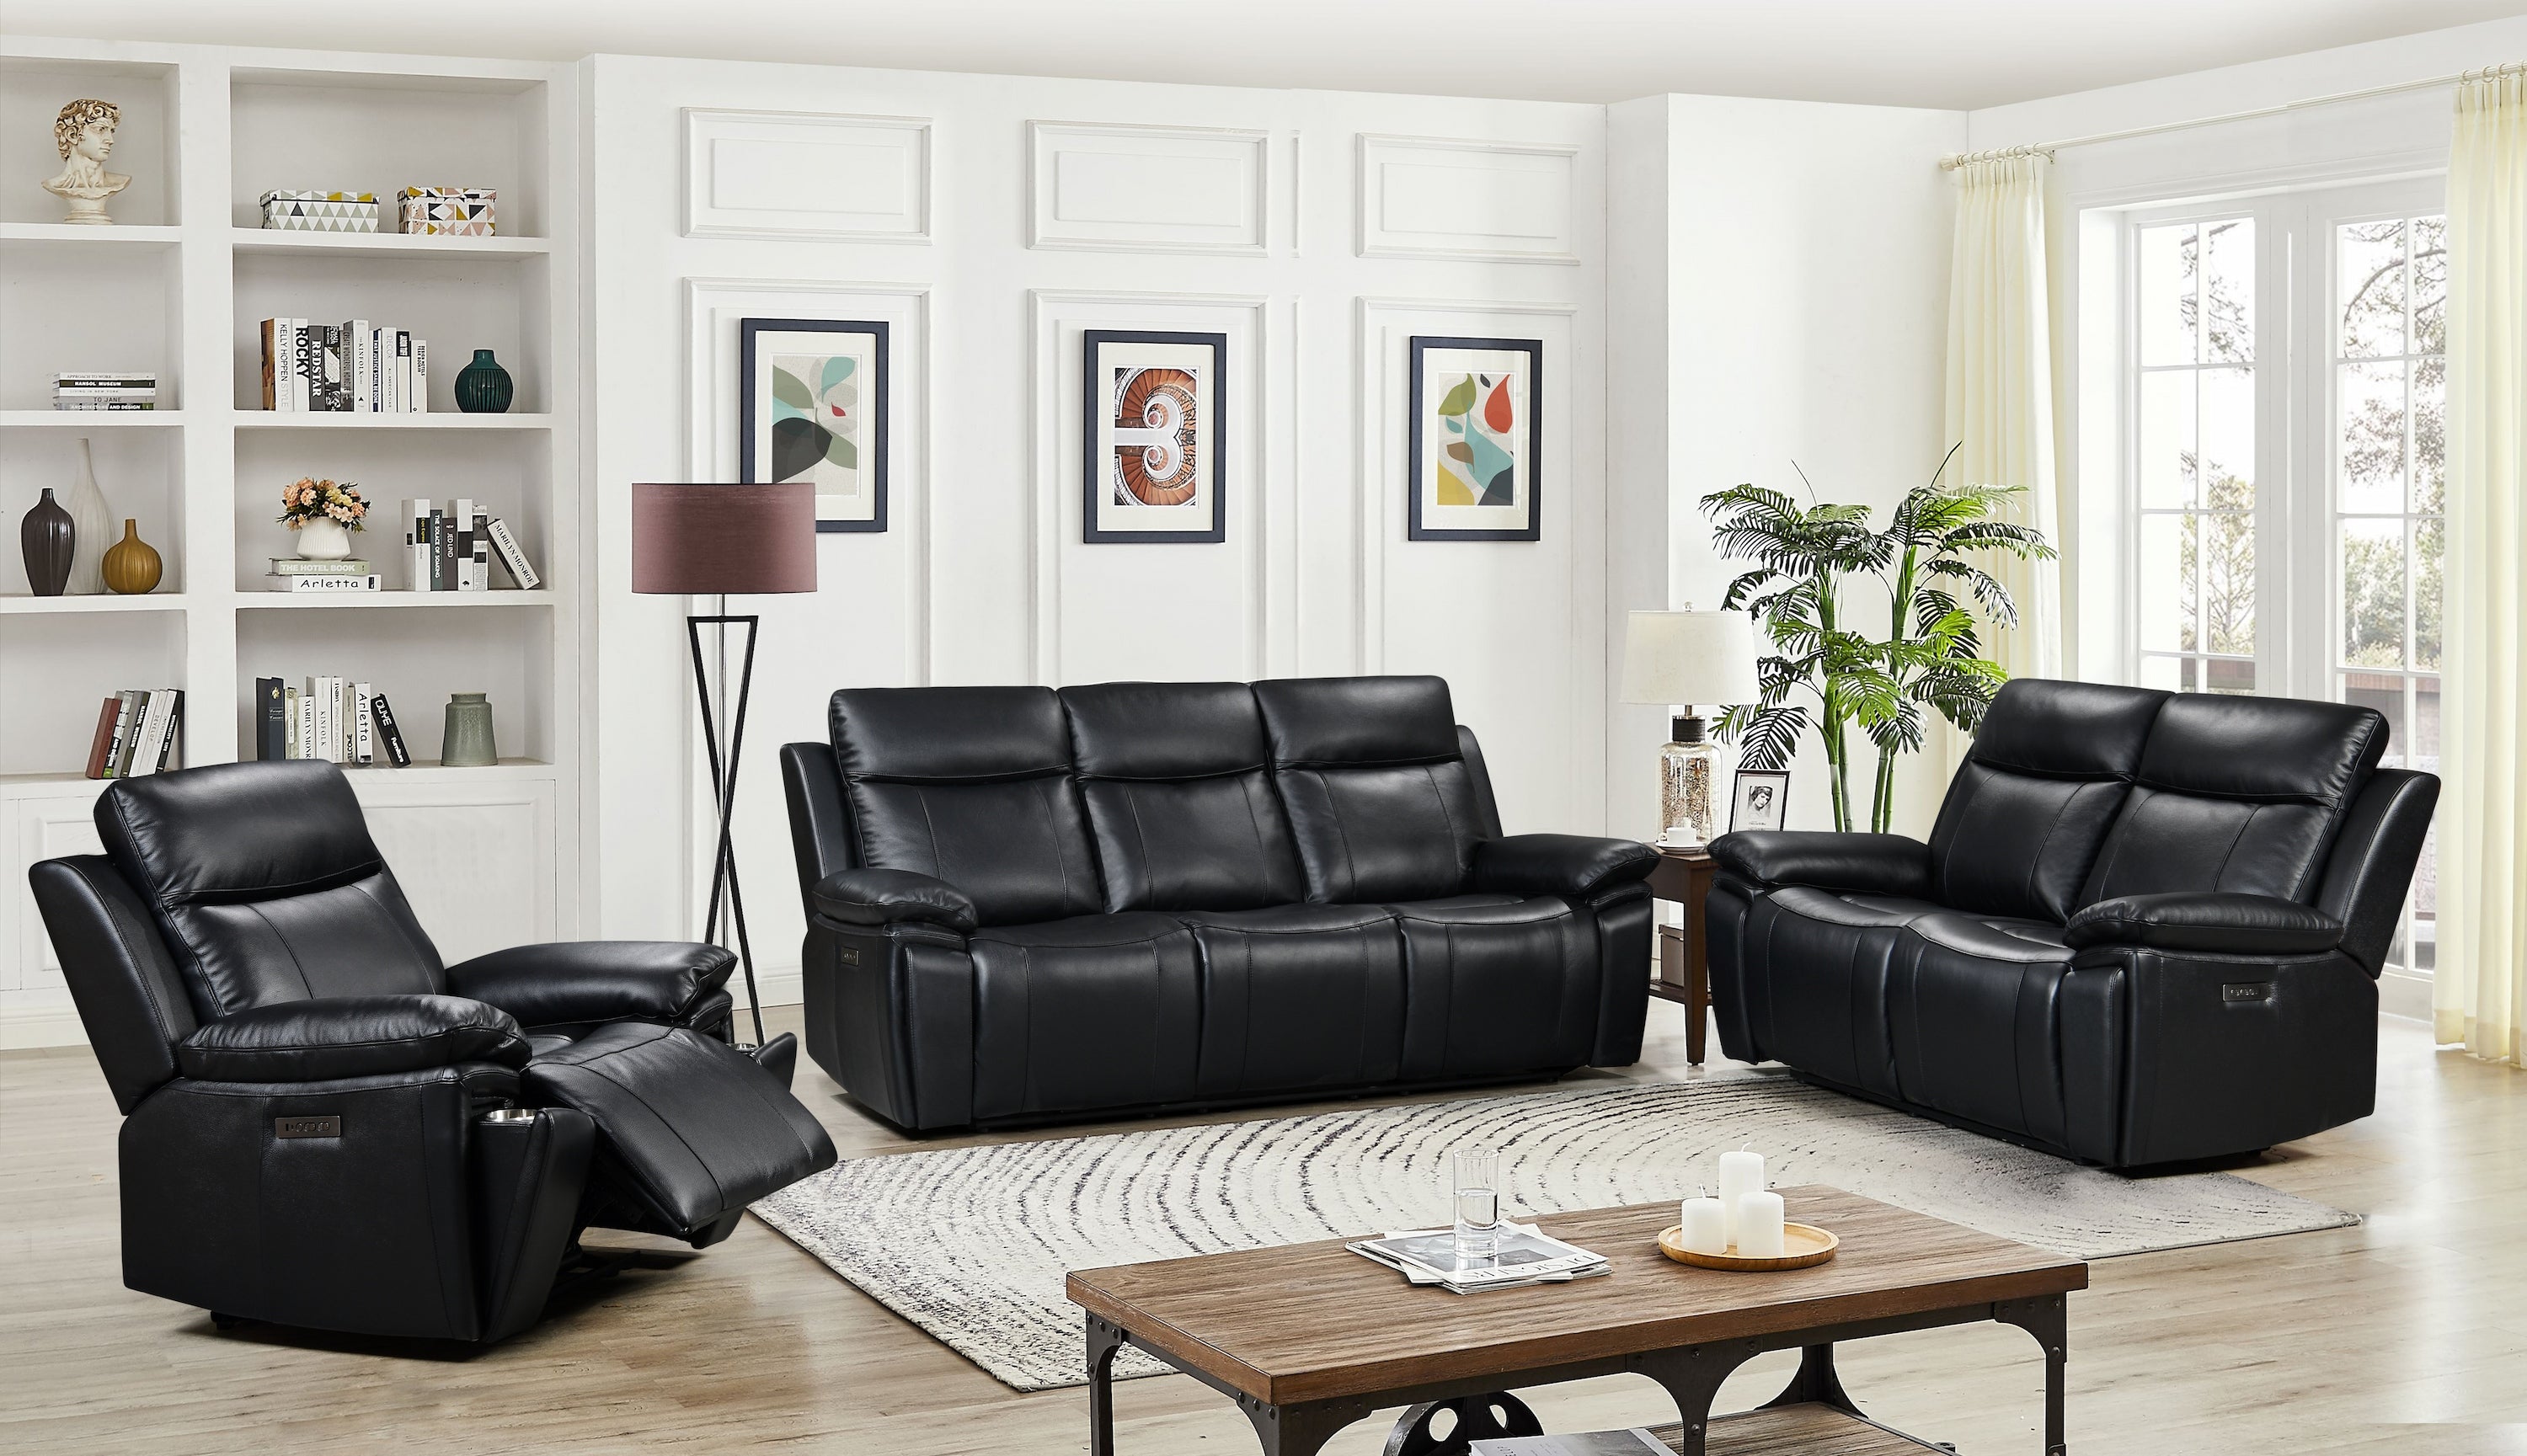 Savio 3 Seater Leather Sofa with Power Recliners, Power Headrests and cupholders